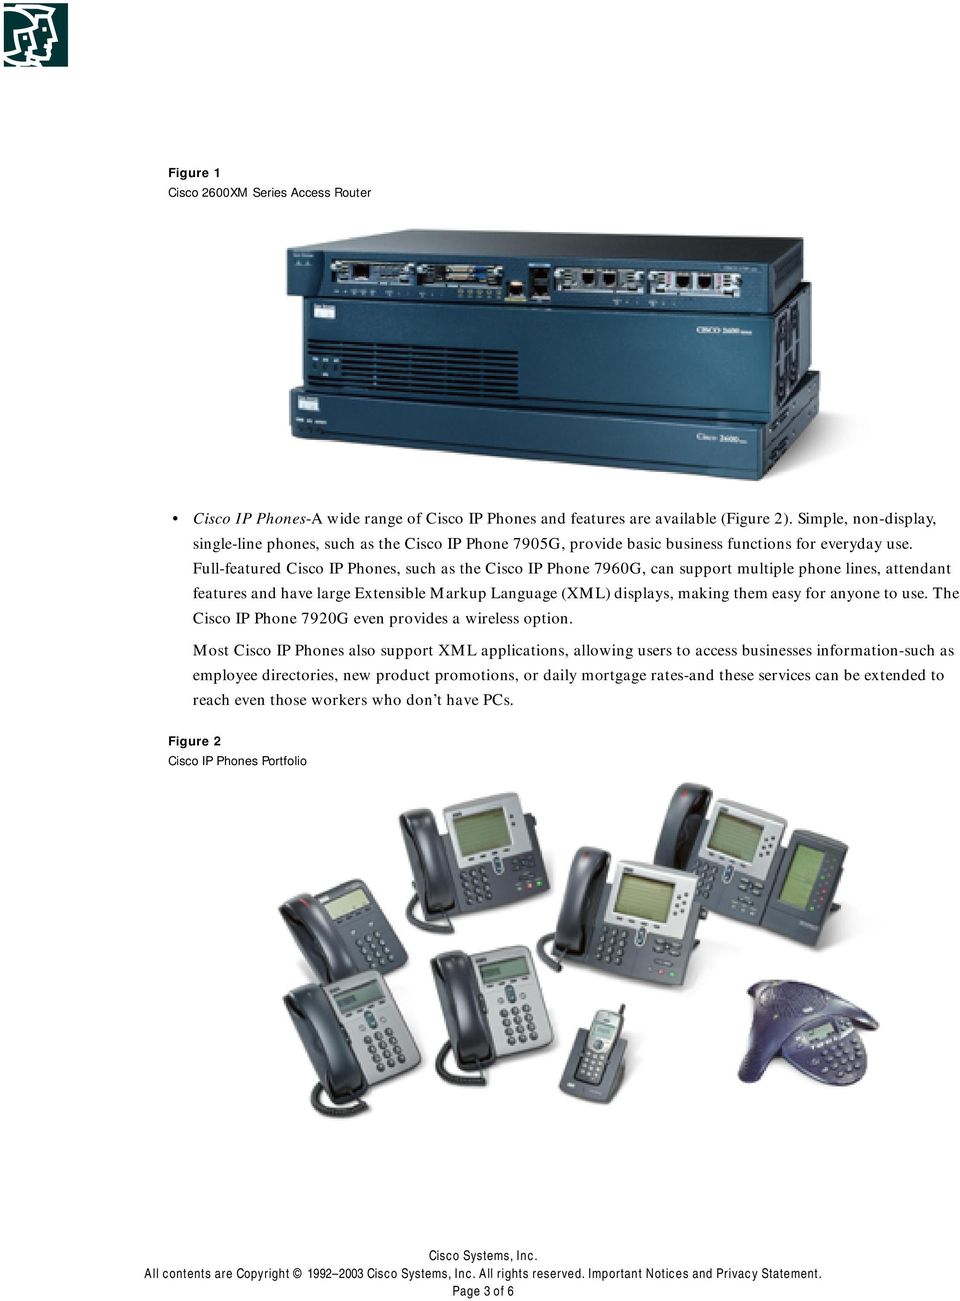 Full-featured Cisco IP Phones, such as the Cisco IP Phone 7960G, can support multiple phone lines, attendant features and have large Extensible Markup Language (XML) displays, making them easy for